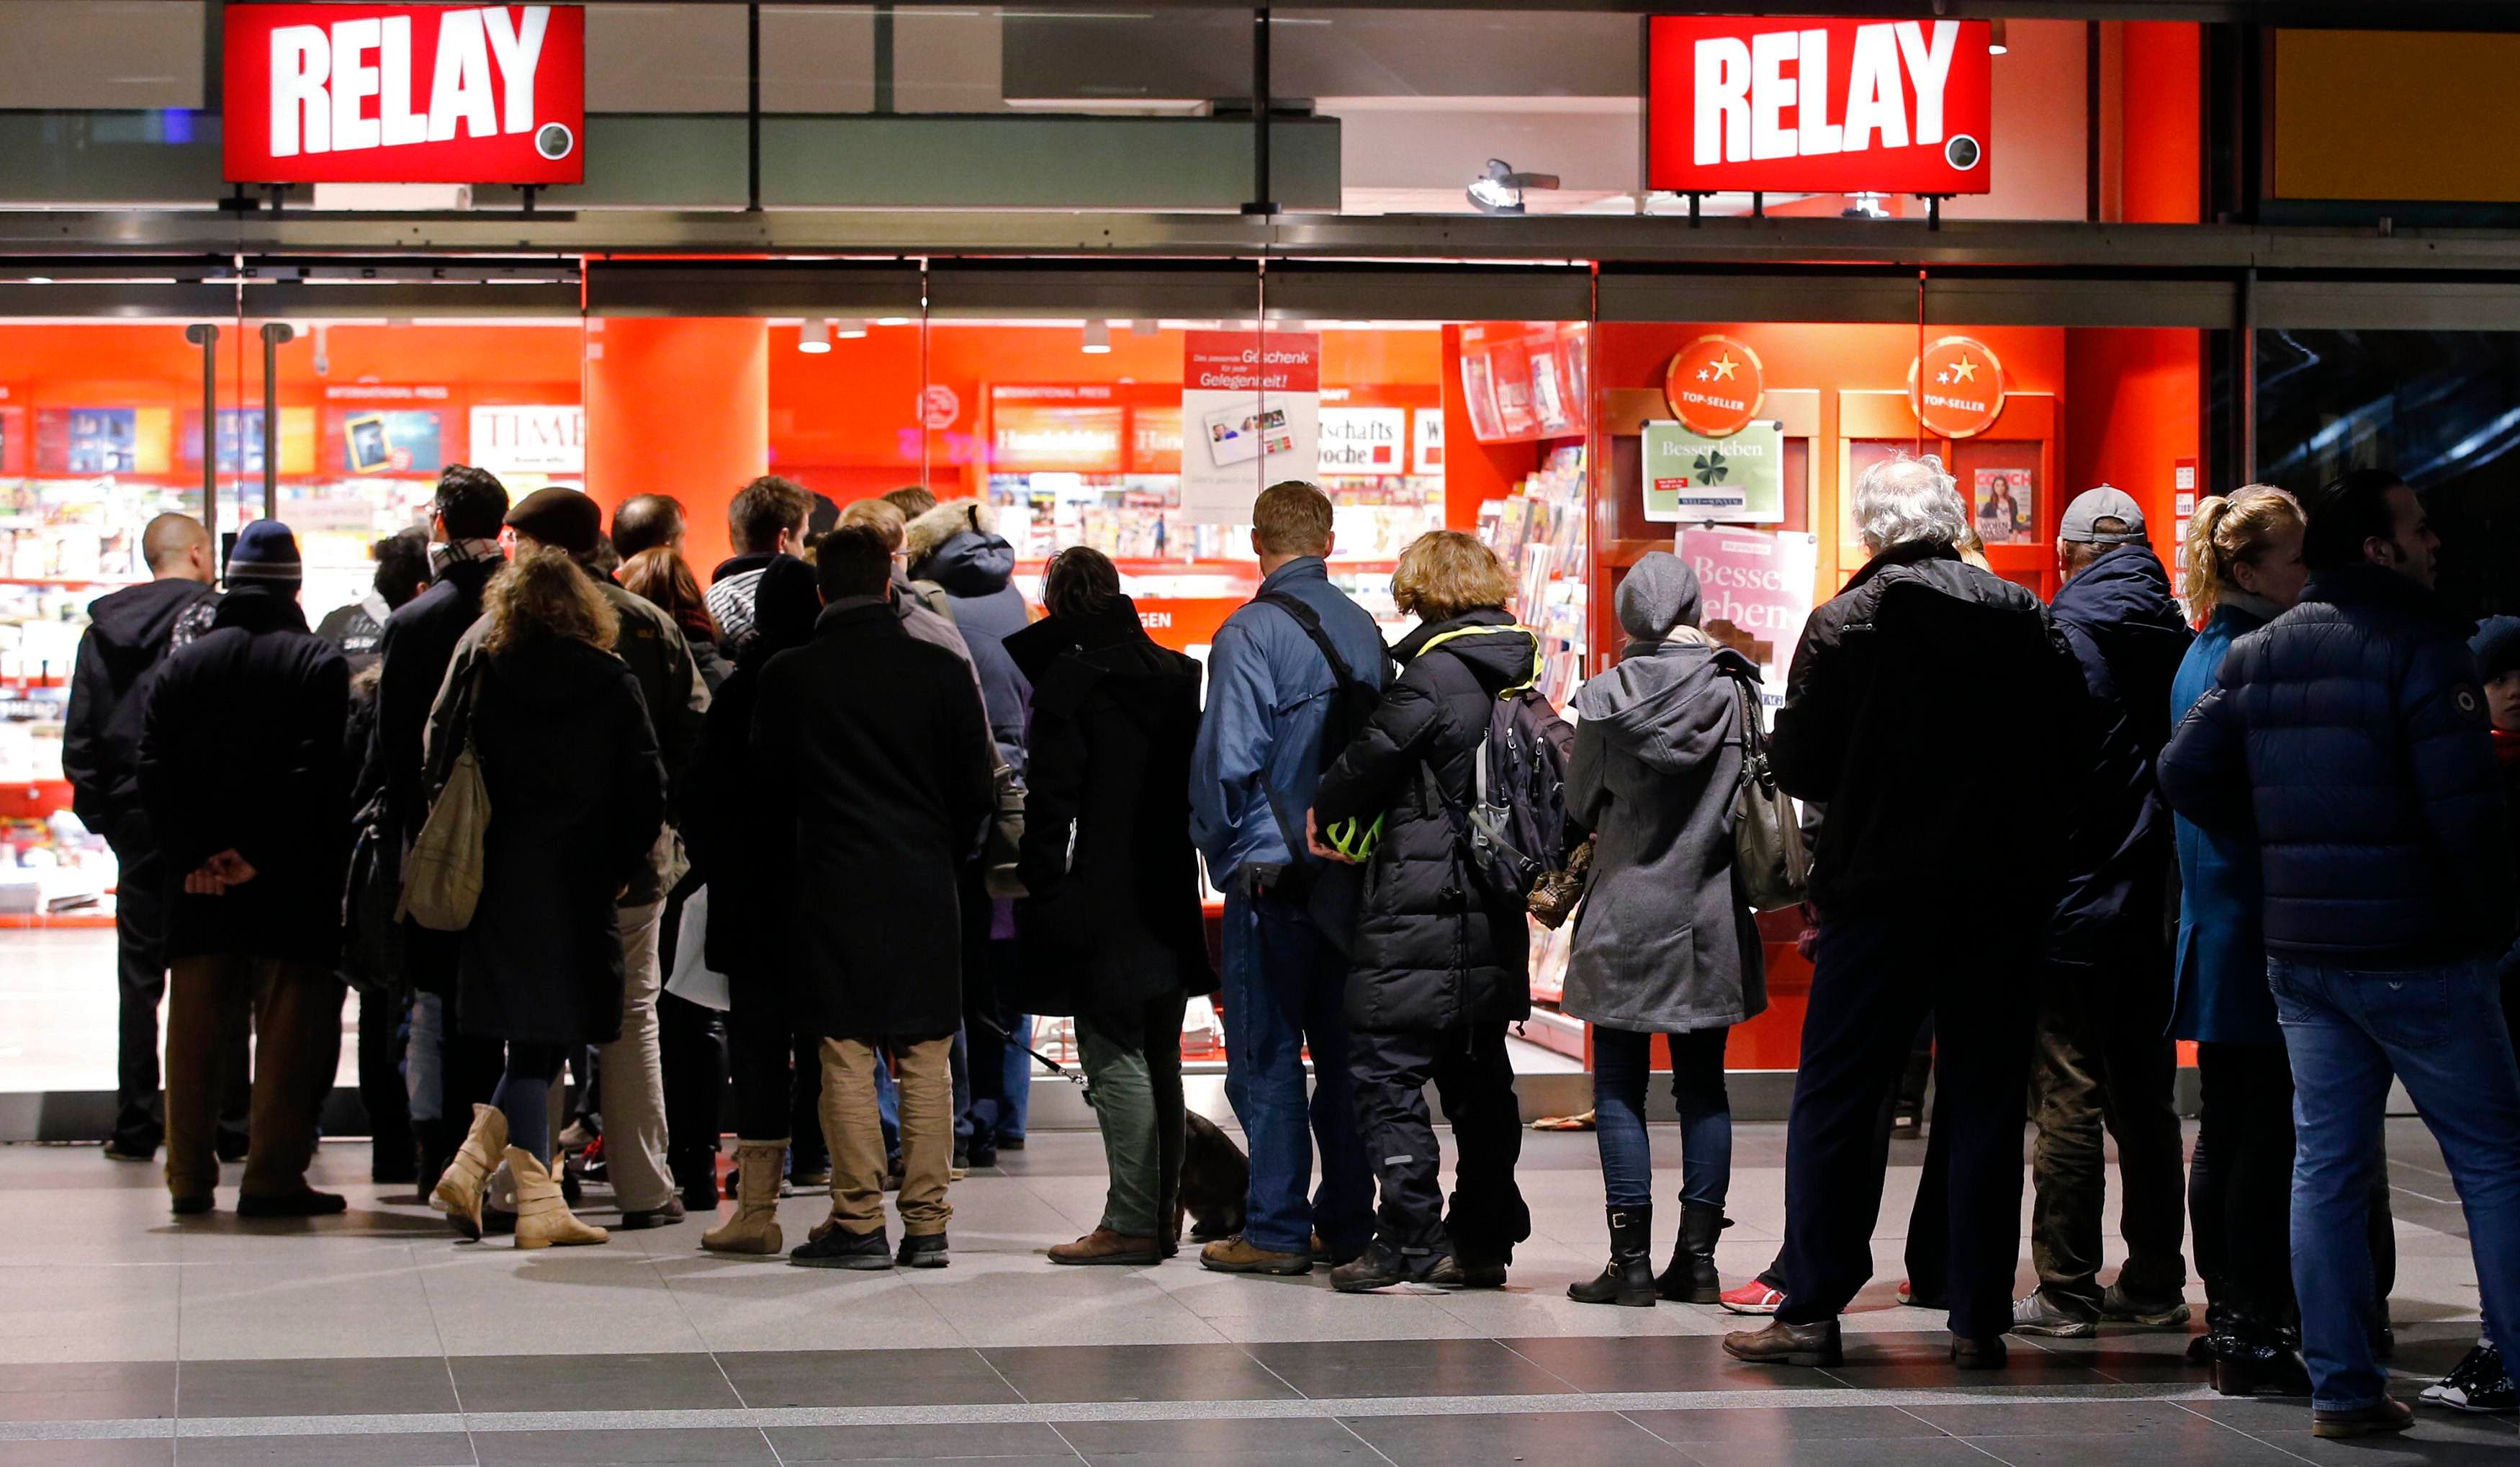 Customers queue outside a newsagent's and bookstore to buy copies of the first edition of French satirical weekly magazine Charlie Hebdo published after the deadly attacks by Islamist gunmen in Paris last week, at the main Hauptbahnhof railway station in Berlin January 17. Photo: Reuters 